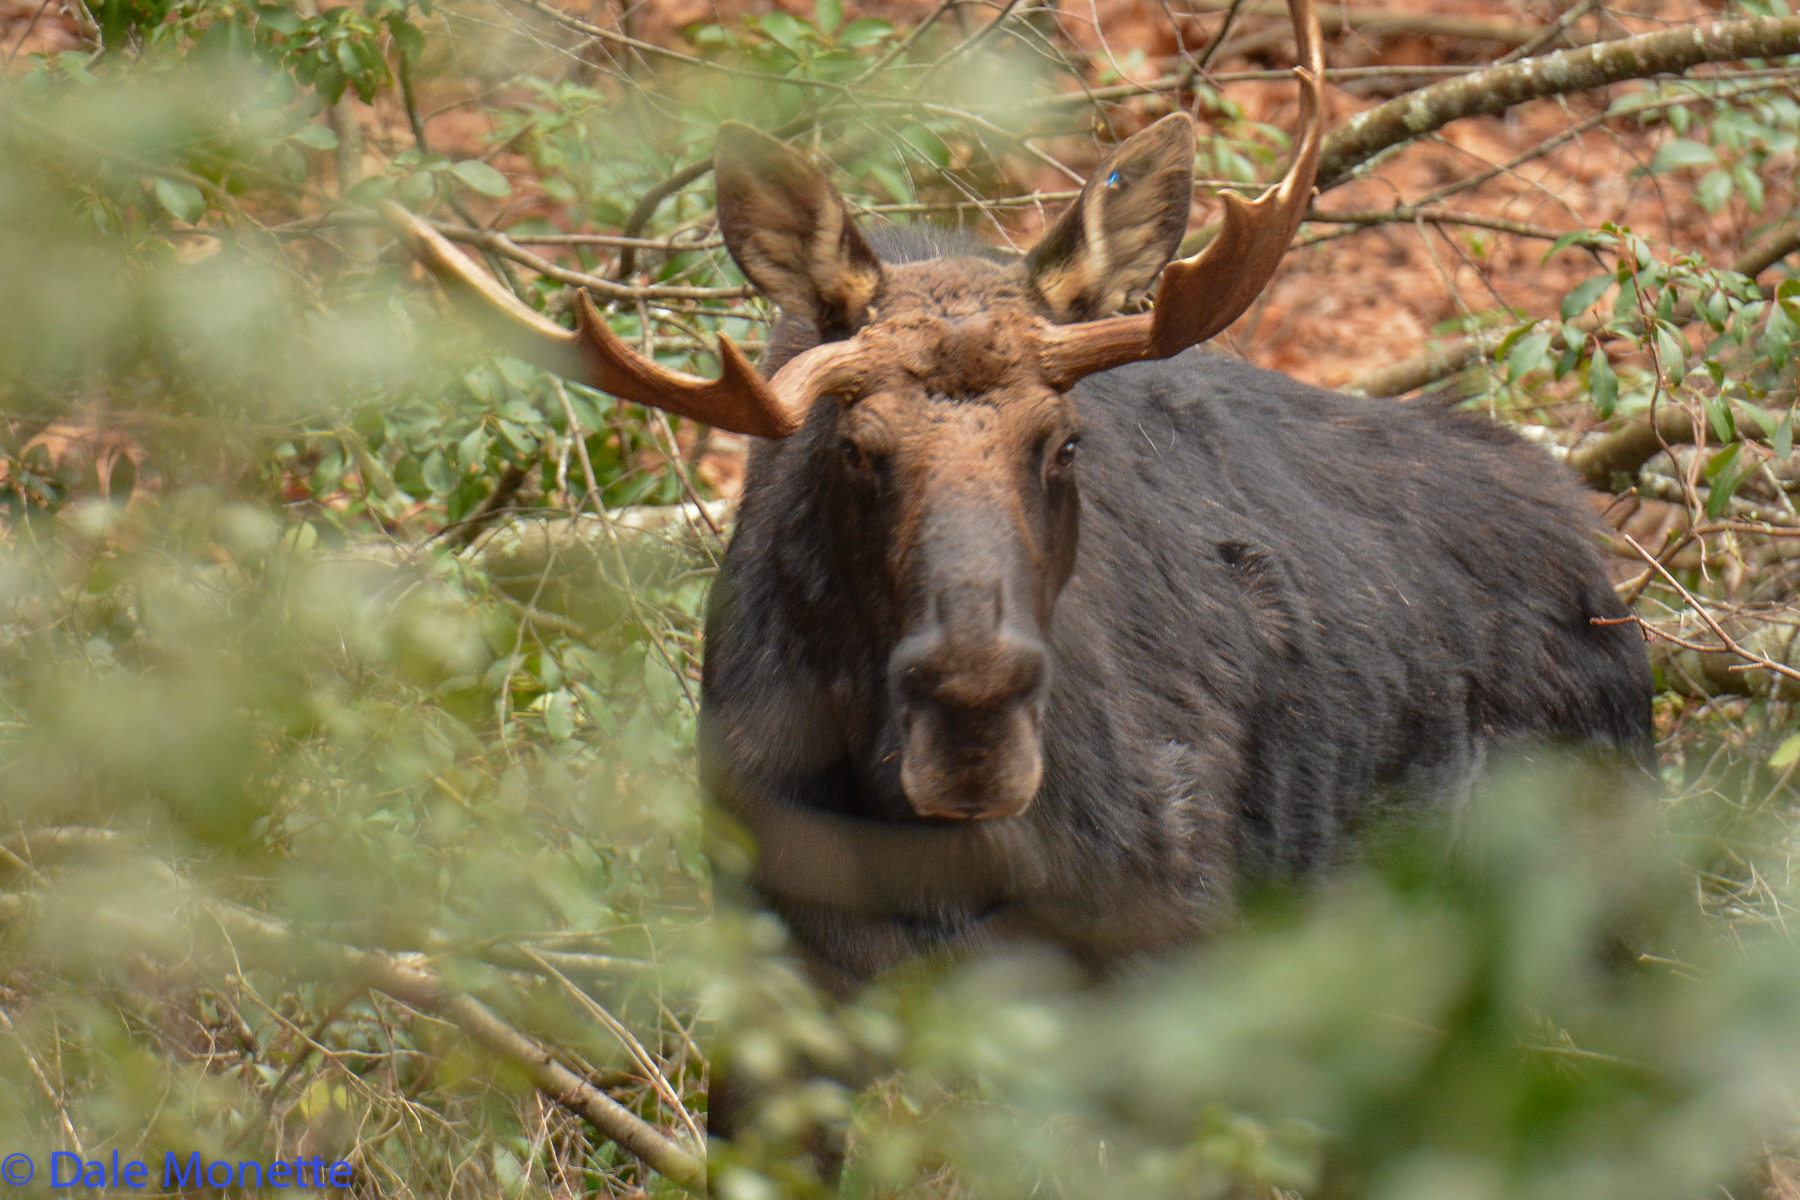   Another way to identify him is his antlers. They don't quite match do they?  